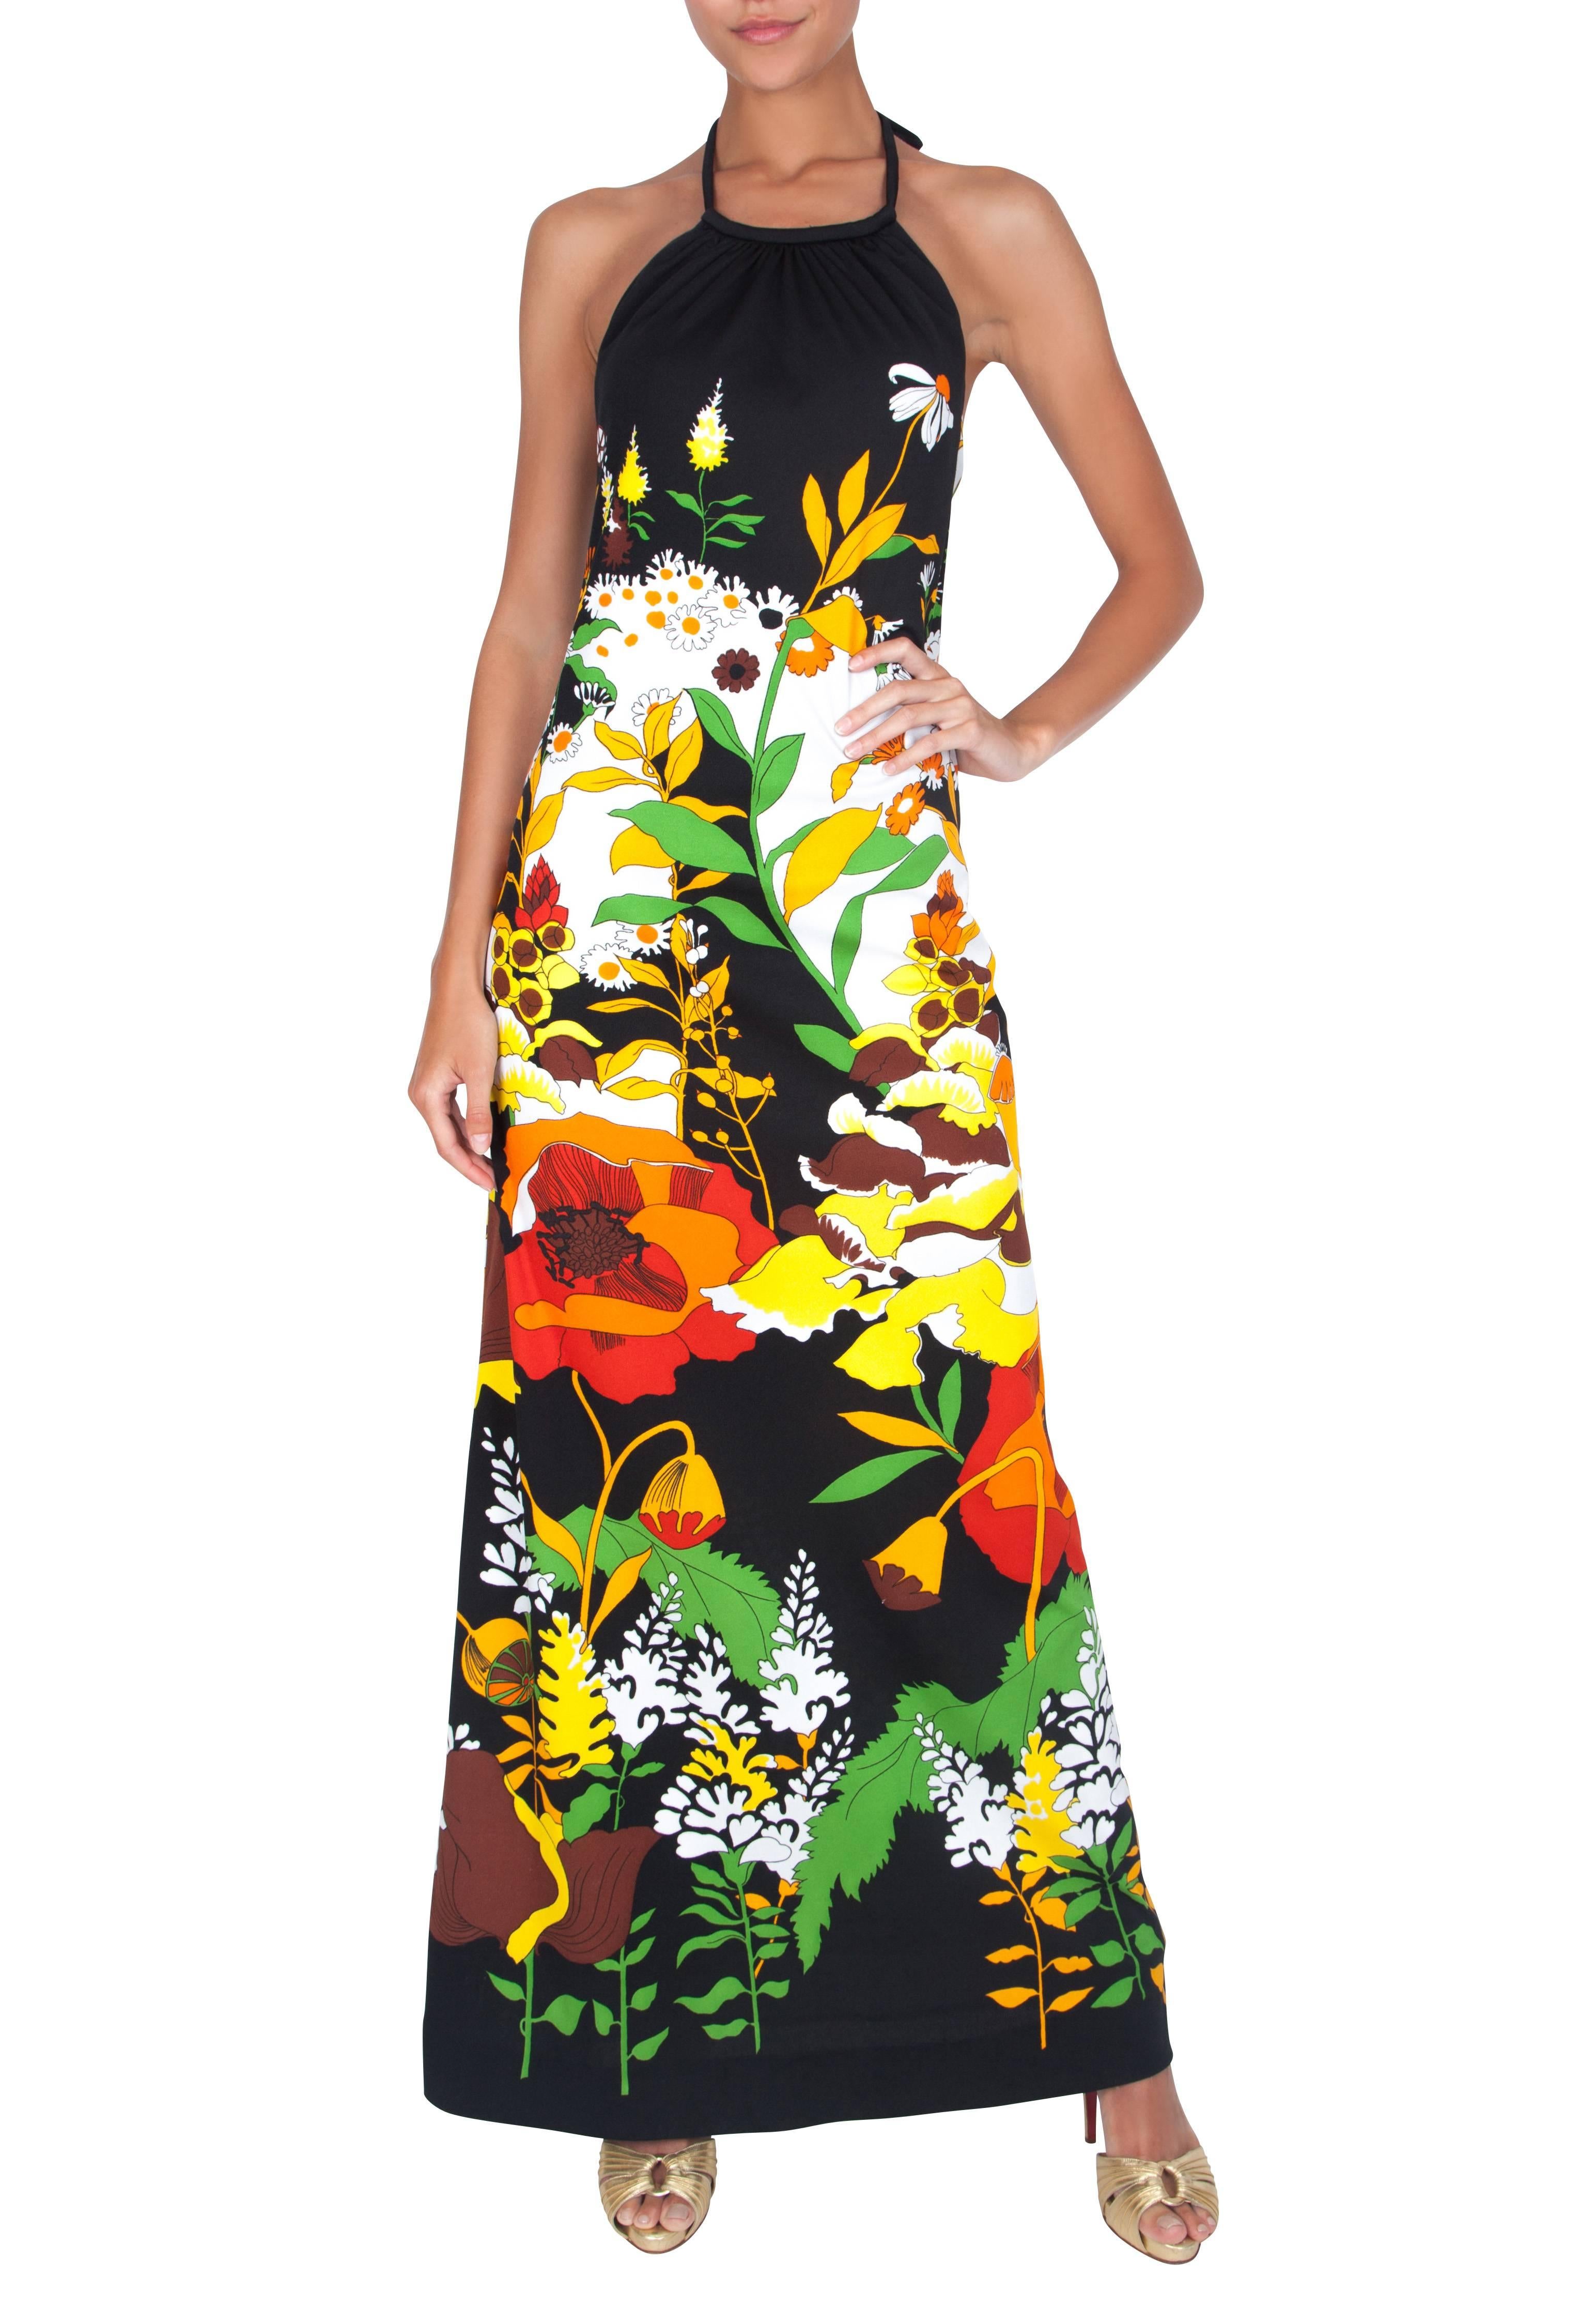 The focal point in this 1970's black halter dress is the striking placement print in white, orange and green. Made from a black lightweight synthetic fabric, extremely soft to the touch. This dress is unlined and features a halter shape with a